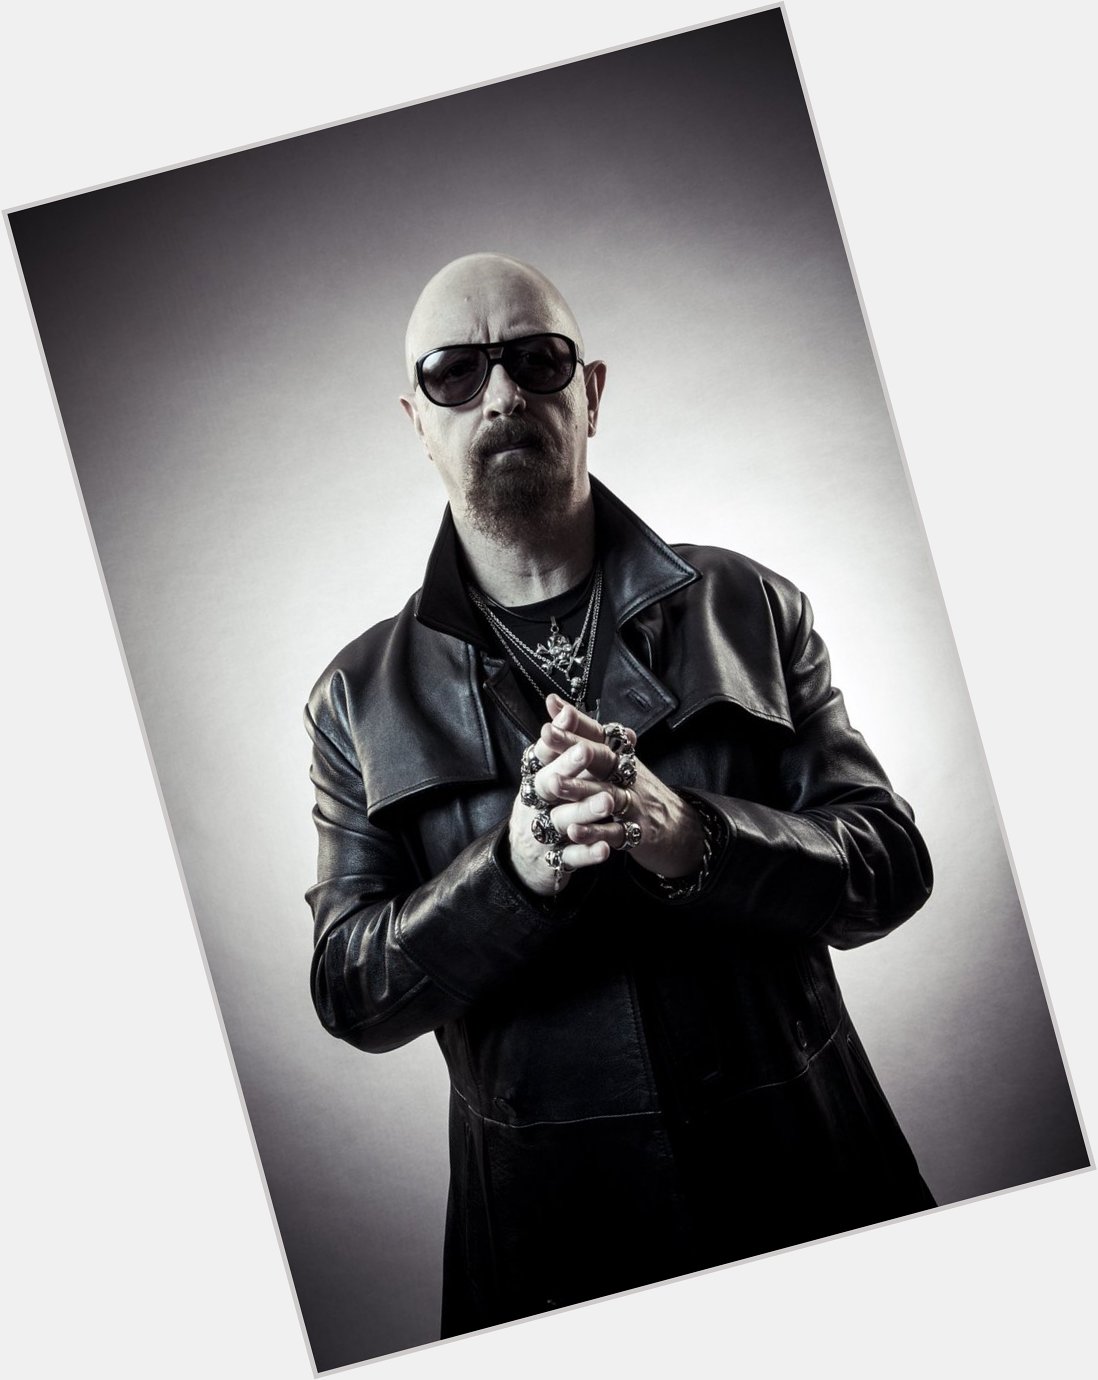 Happy birthday Rob Halford A toast and keep breaking the law. 